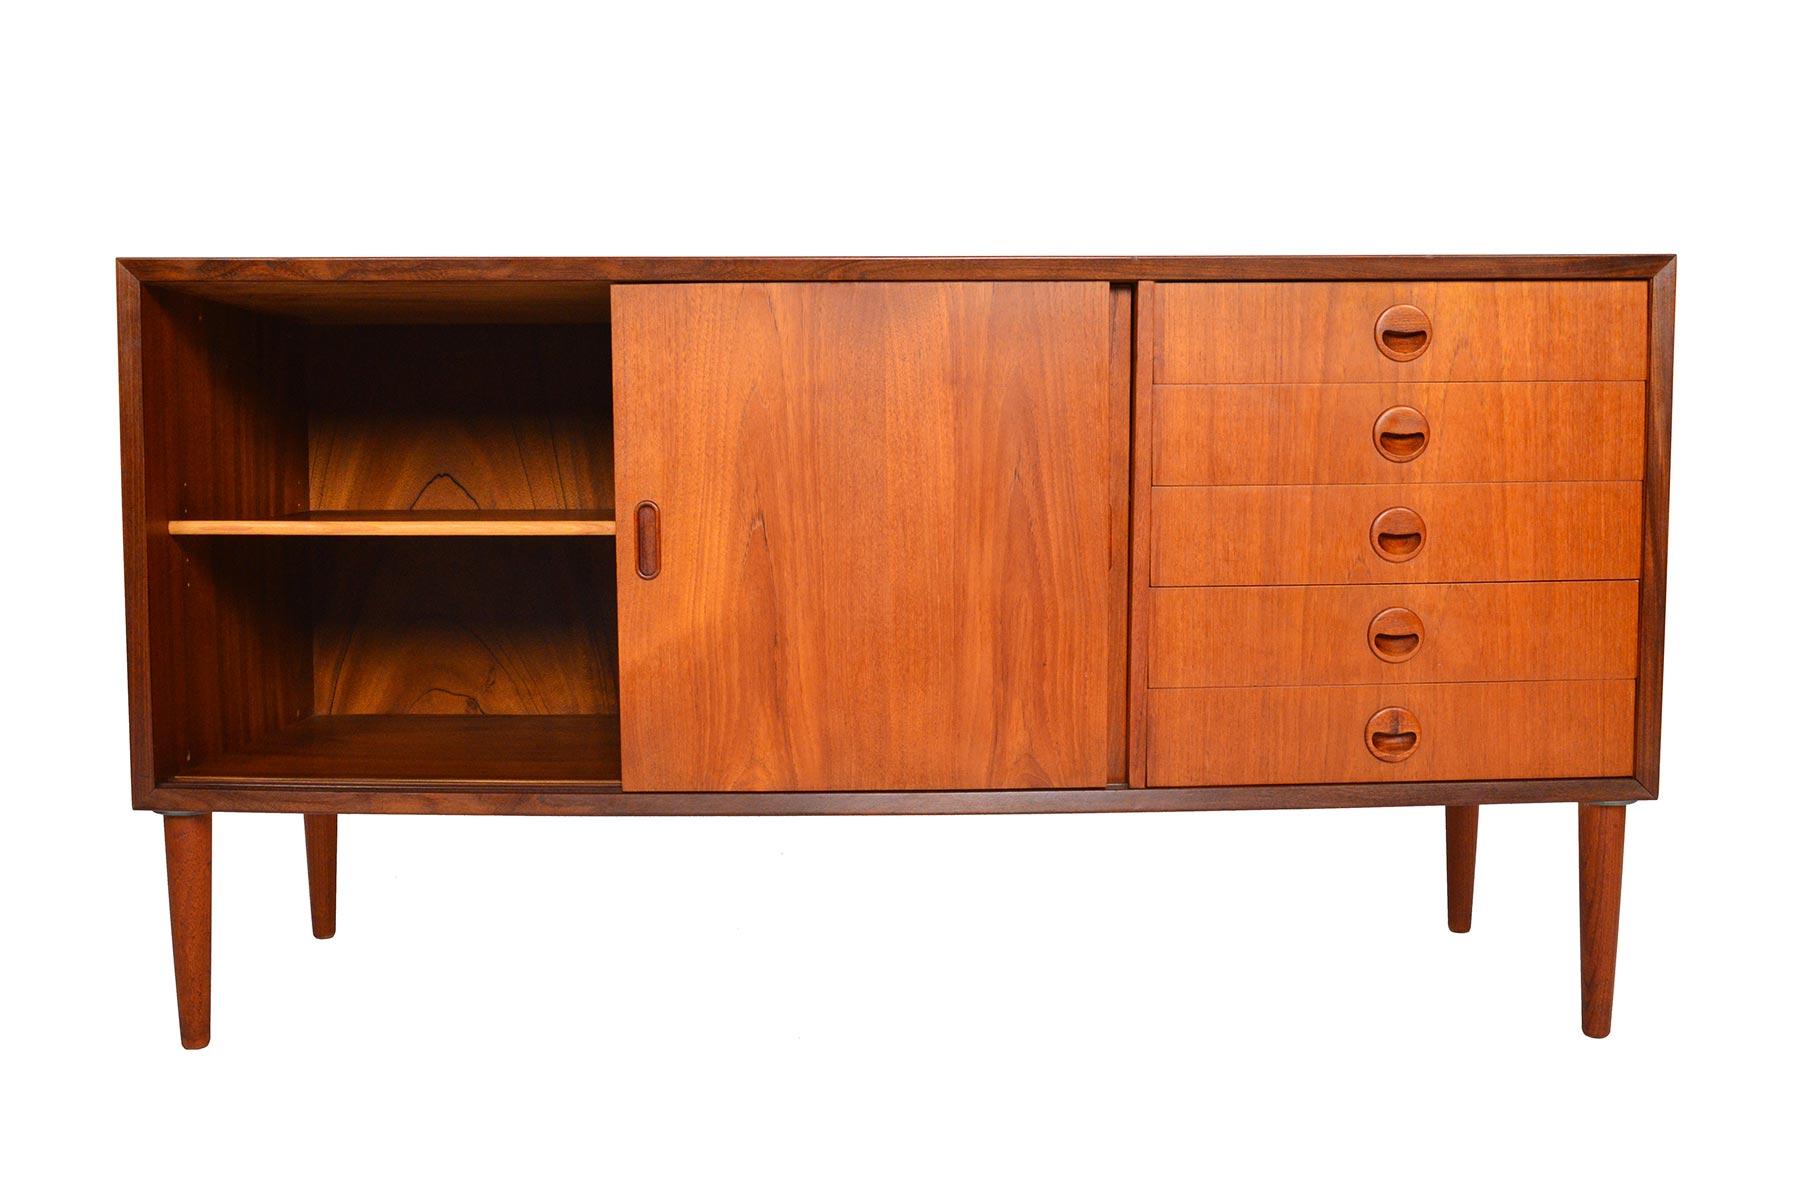 Perfectly sized for modern living, this Danish modern teak credenza was designed with functionality in mind. Two sliding doors open to reveal a large cabinet with an adjustable shelf. A bank of five drawers sit to the right. In excellent original